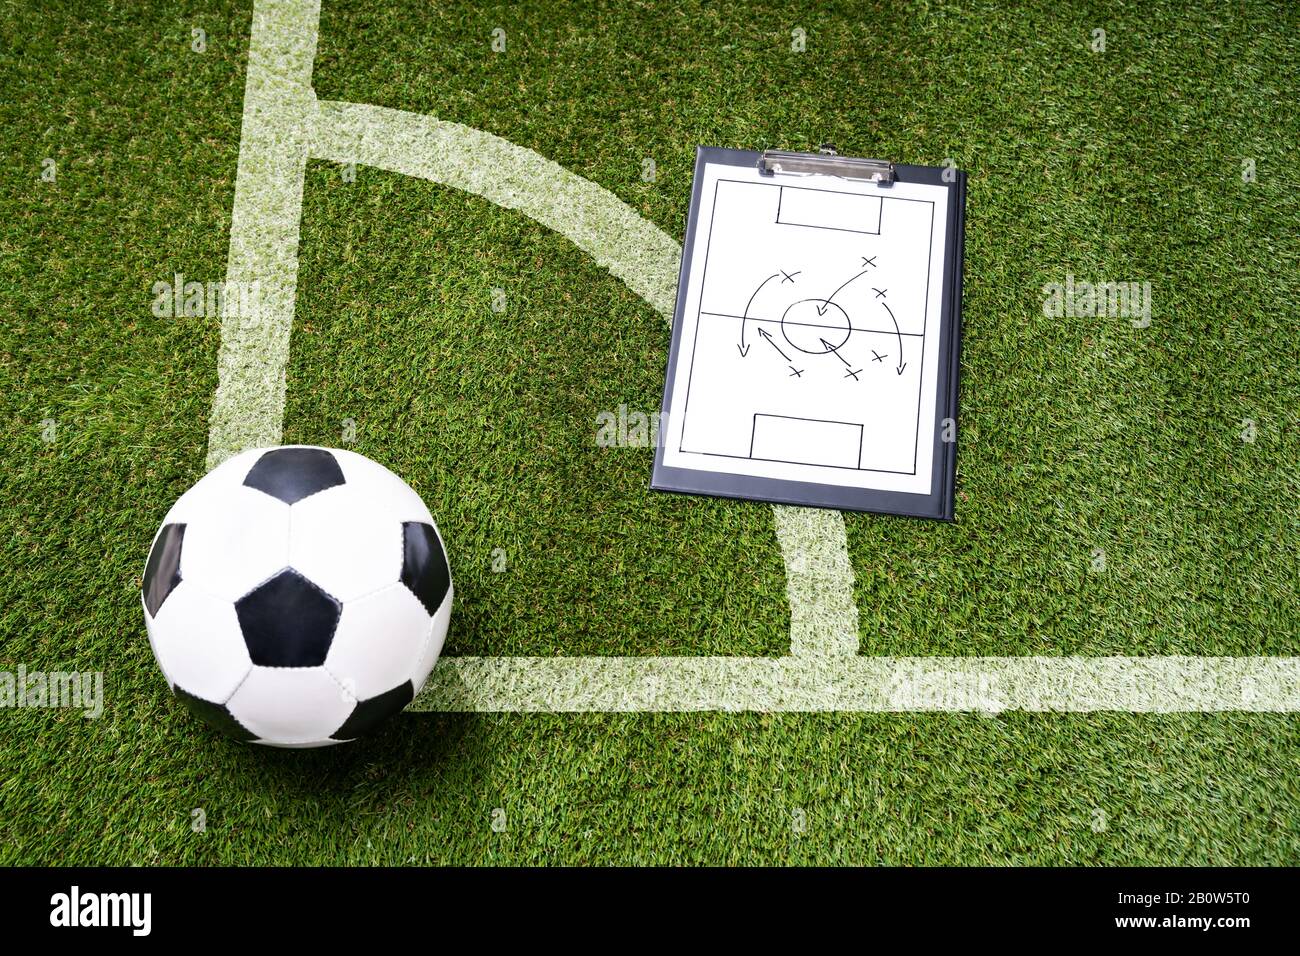 Ball; Whistle And Soccer Tactic Diagram On Pitch Stock Photo